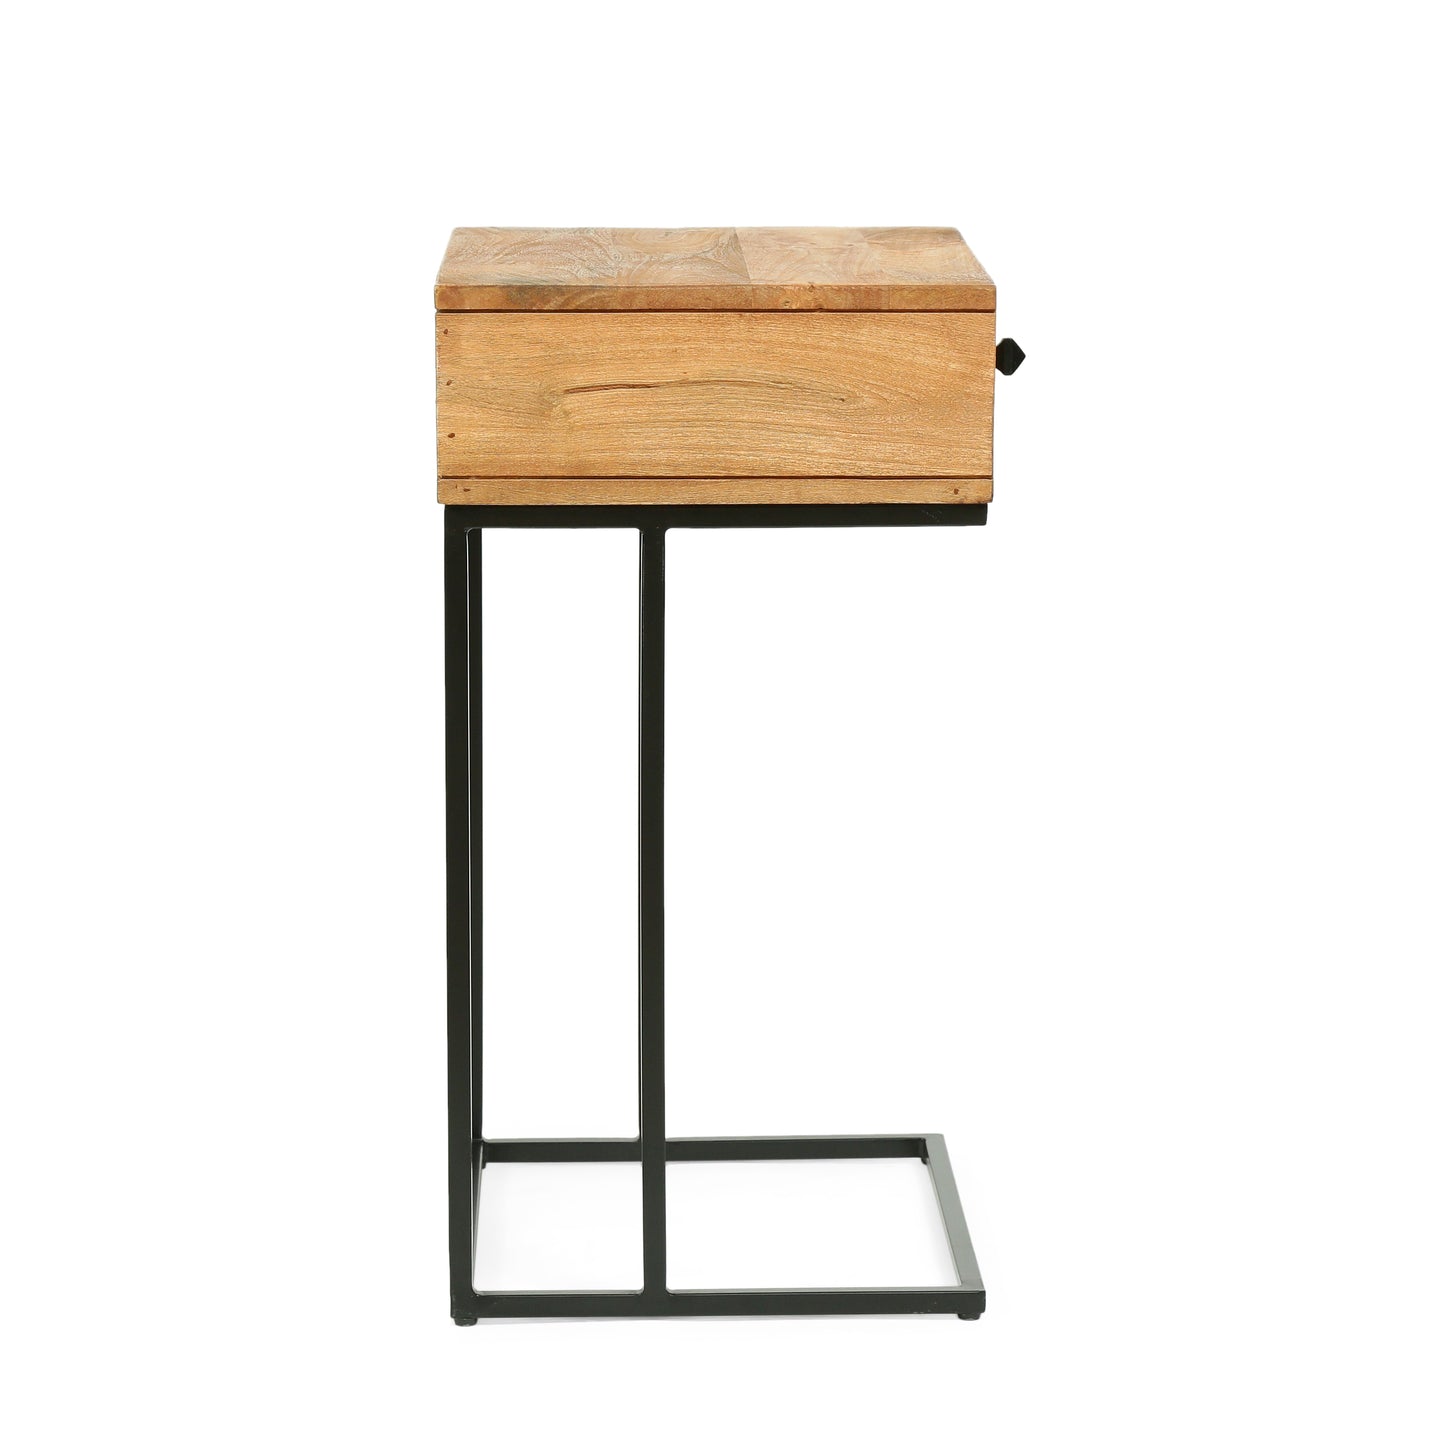 Wickson Modern Industrial Handmade Mango Wood C-Shaped Side Table with Drawer, Natural and Black